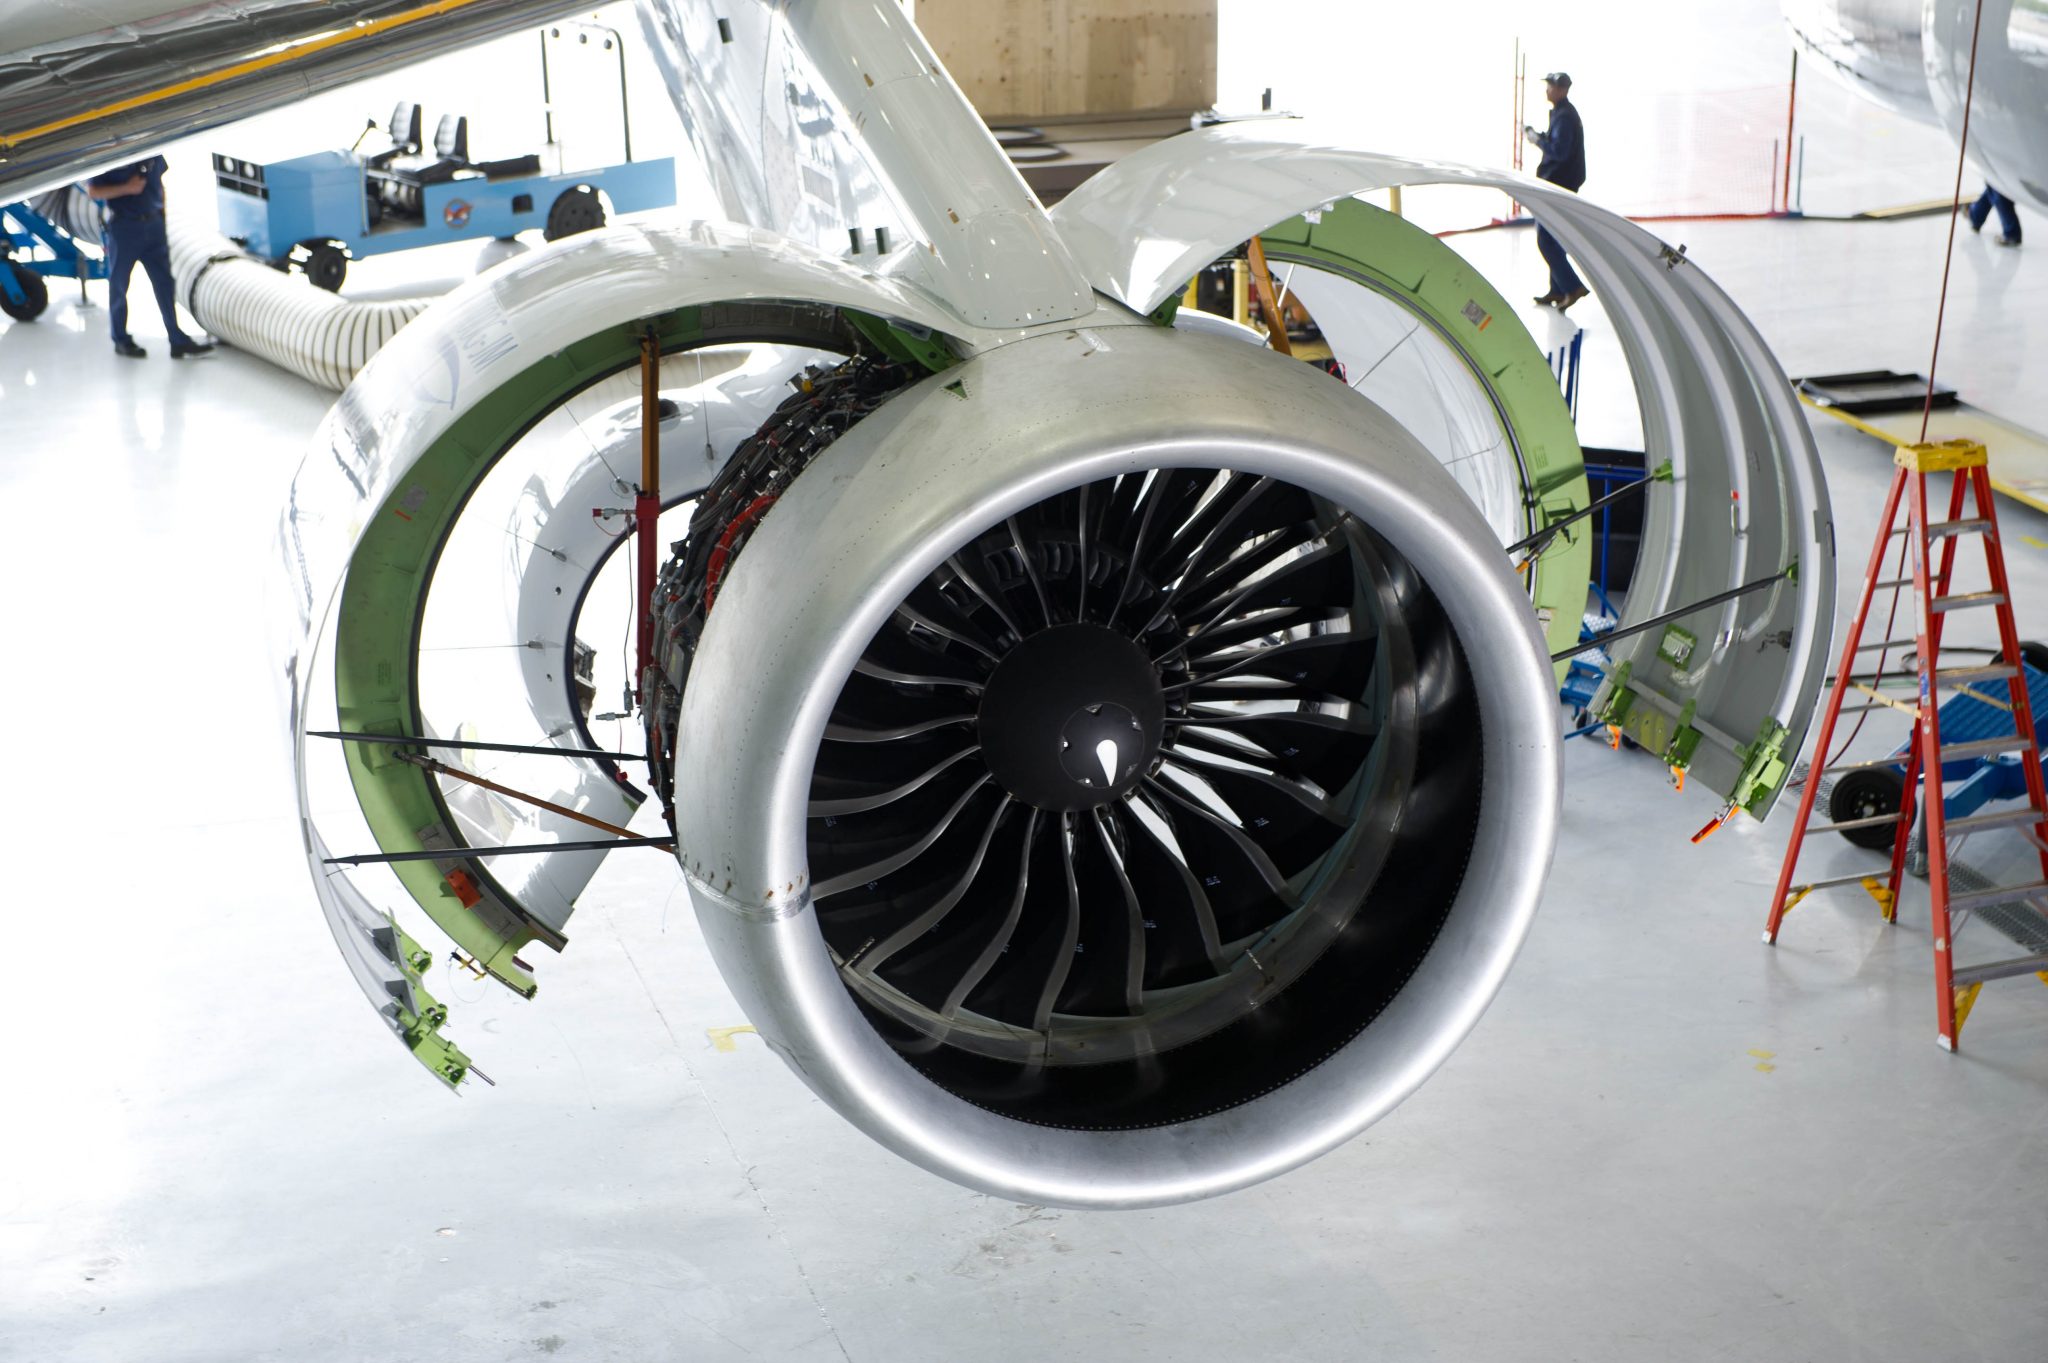 Mobil Jet Oil 387 now approved for PW1100G-JM and PW1400G-JM Geared Turbofan Engines